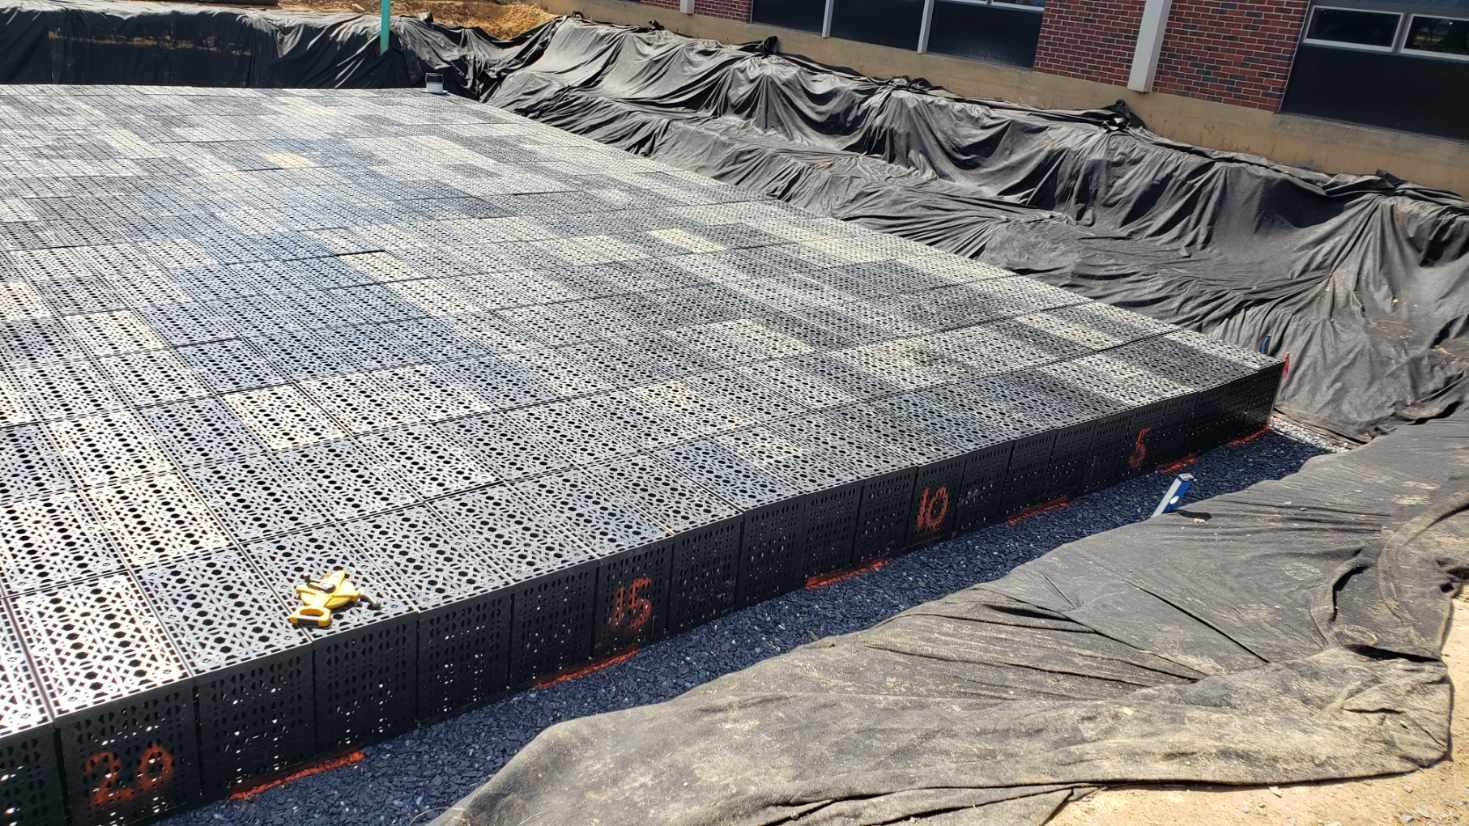 We created a new underground detention basin as part of the renovation of Kratzer Elementary School